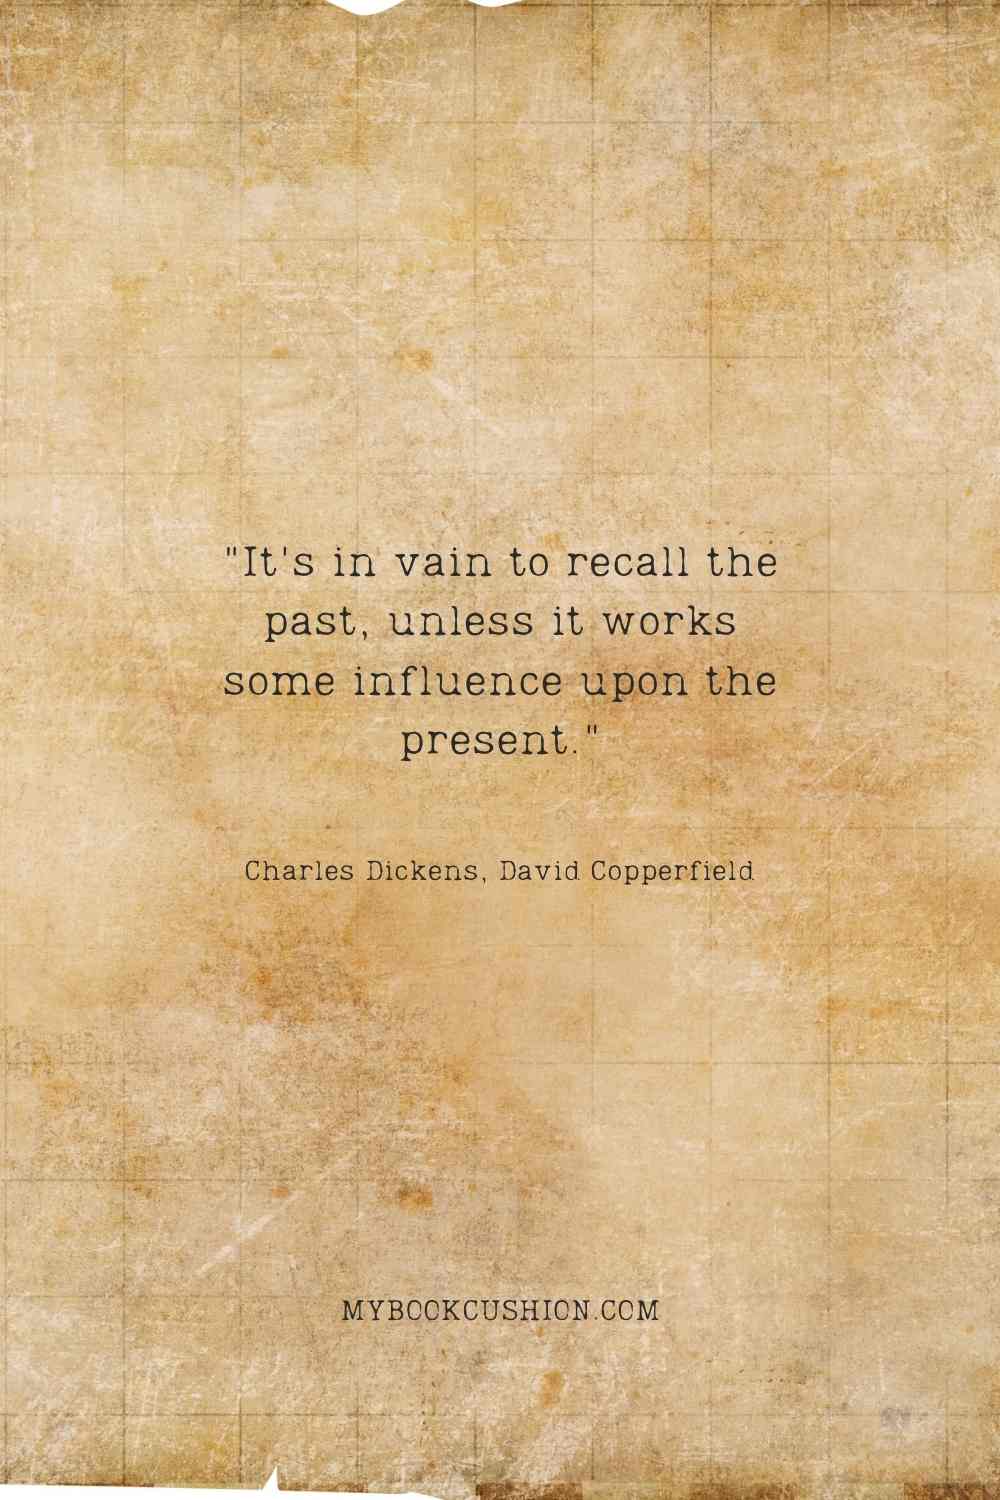 It's in vain to recall the past, unless it works some influence upon the present. - Charles Dickens, David Copperfield